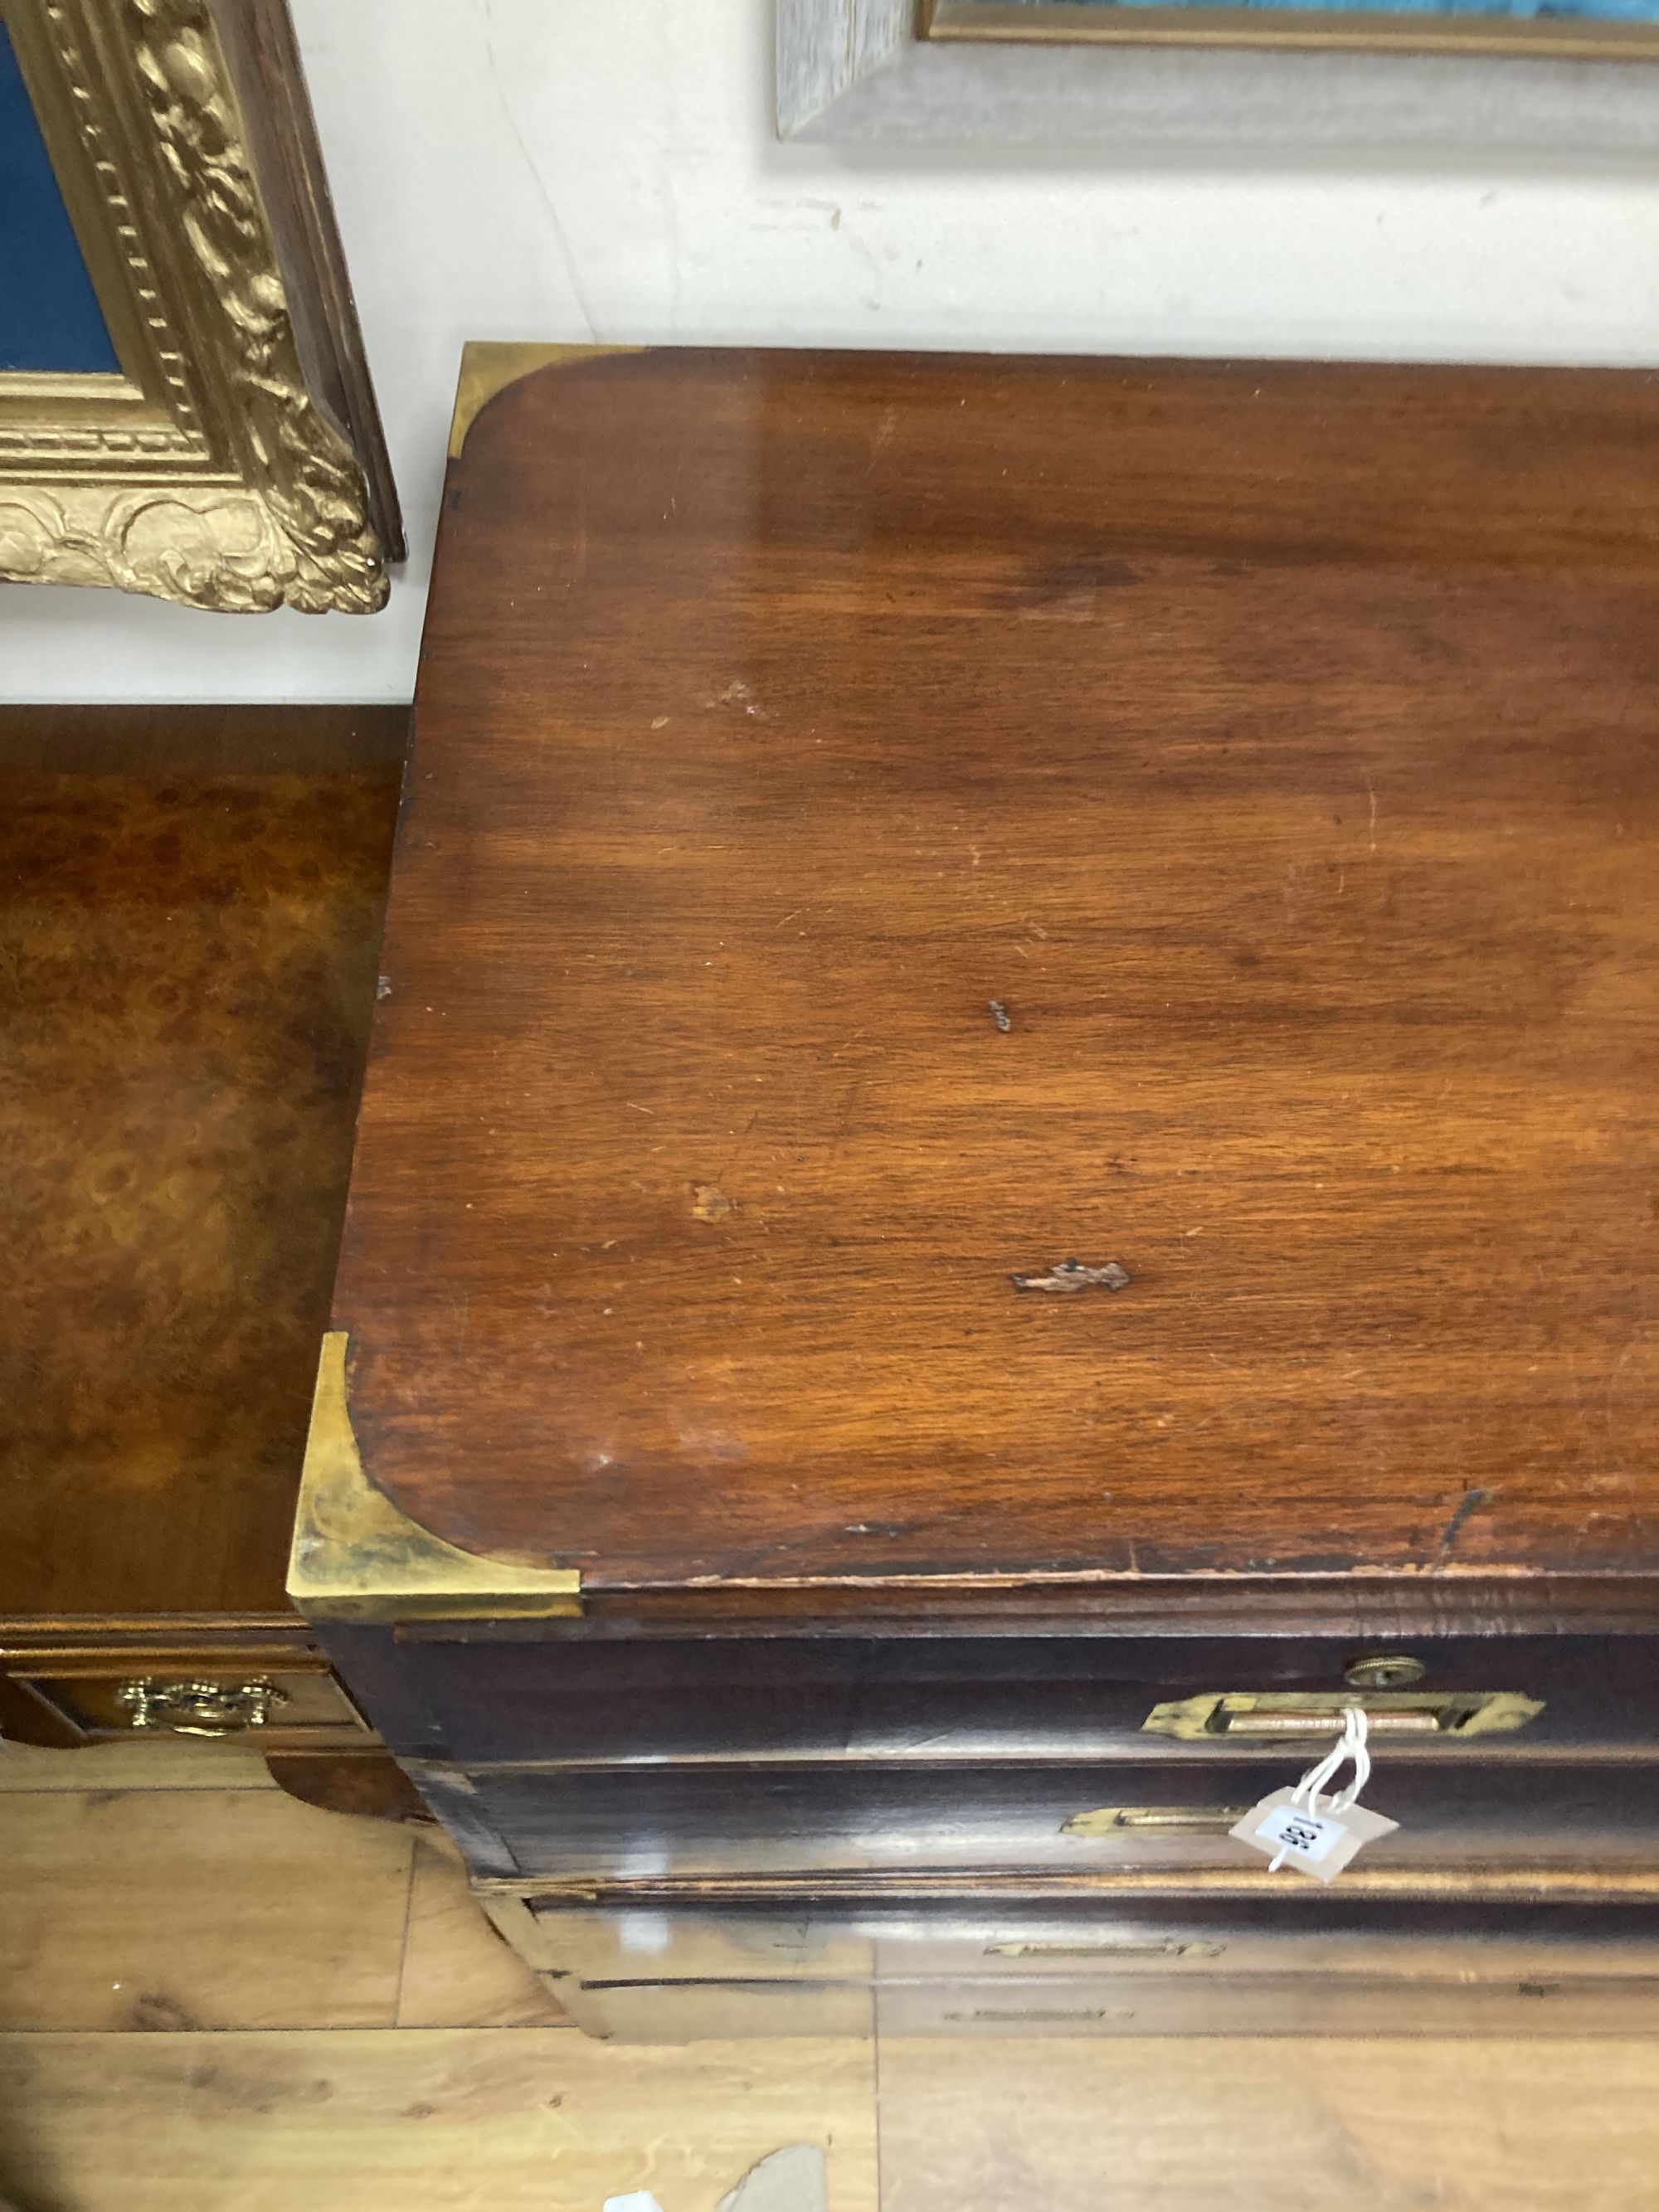 A Victorian style mahogany two part military chest, width 108cm, depth 47cm, height 100cm